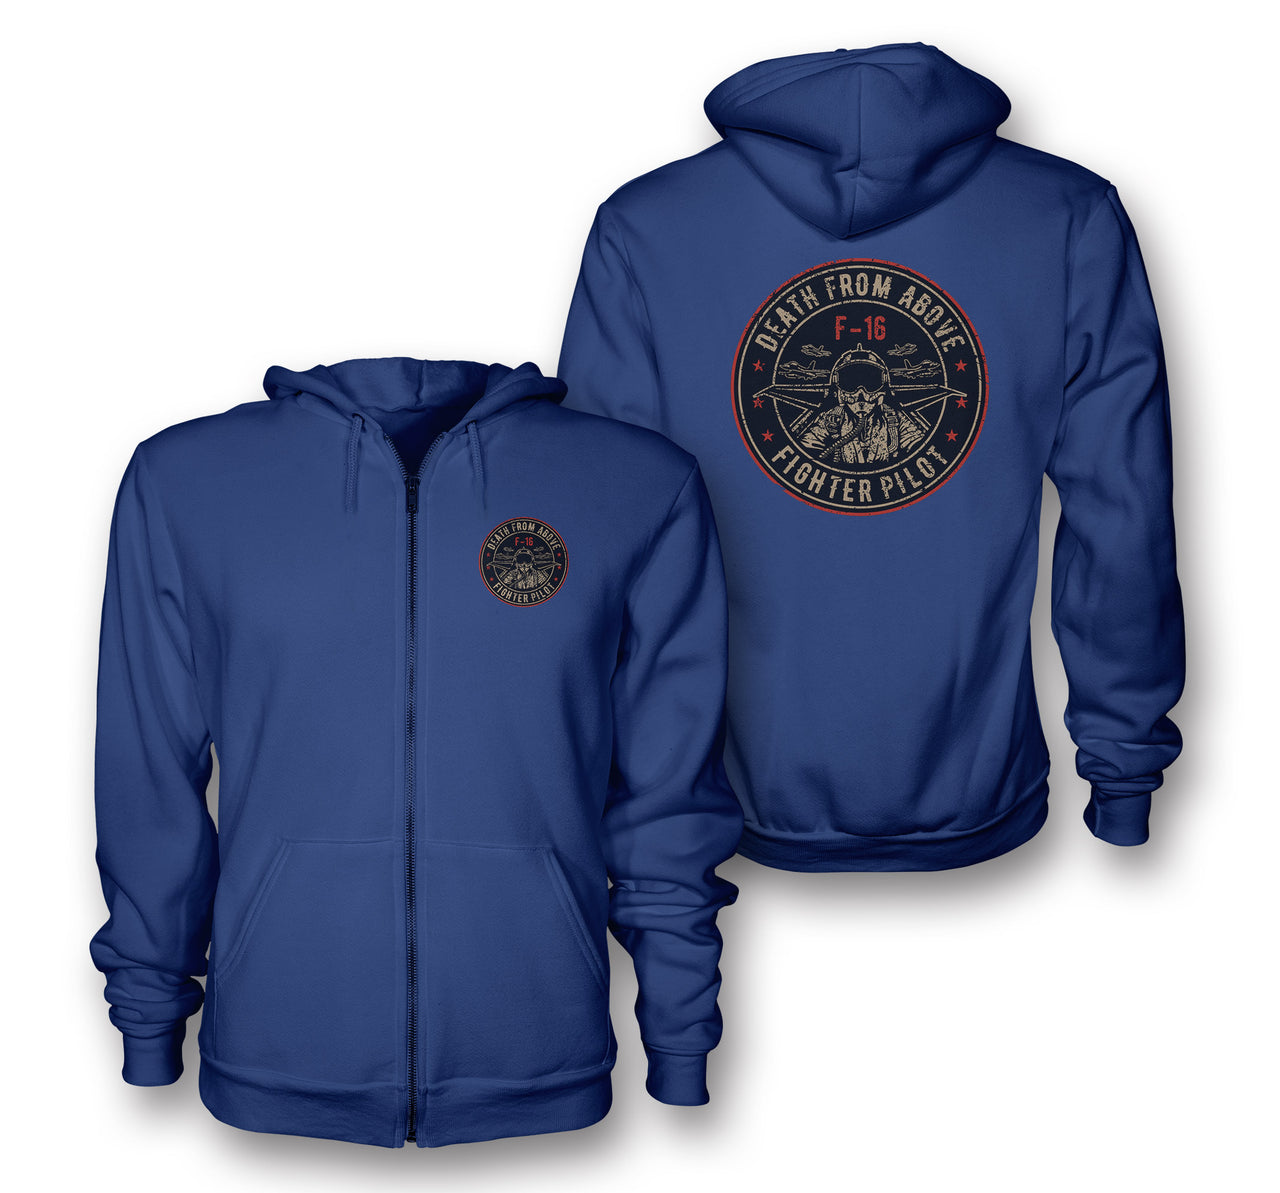 Fighting Falcon F16 - Death From Above Designed Zipped Hoodies